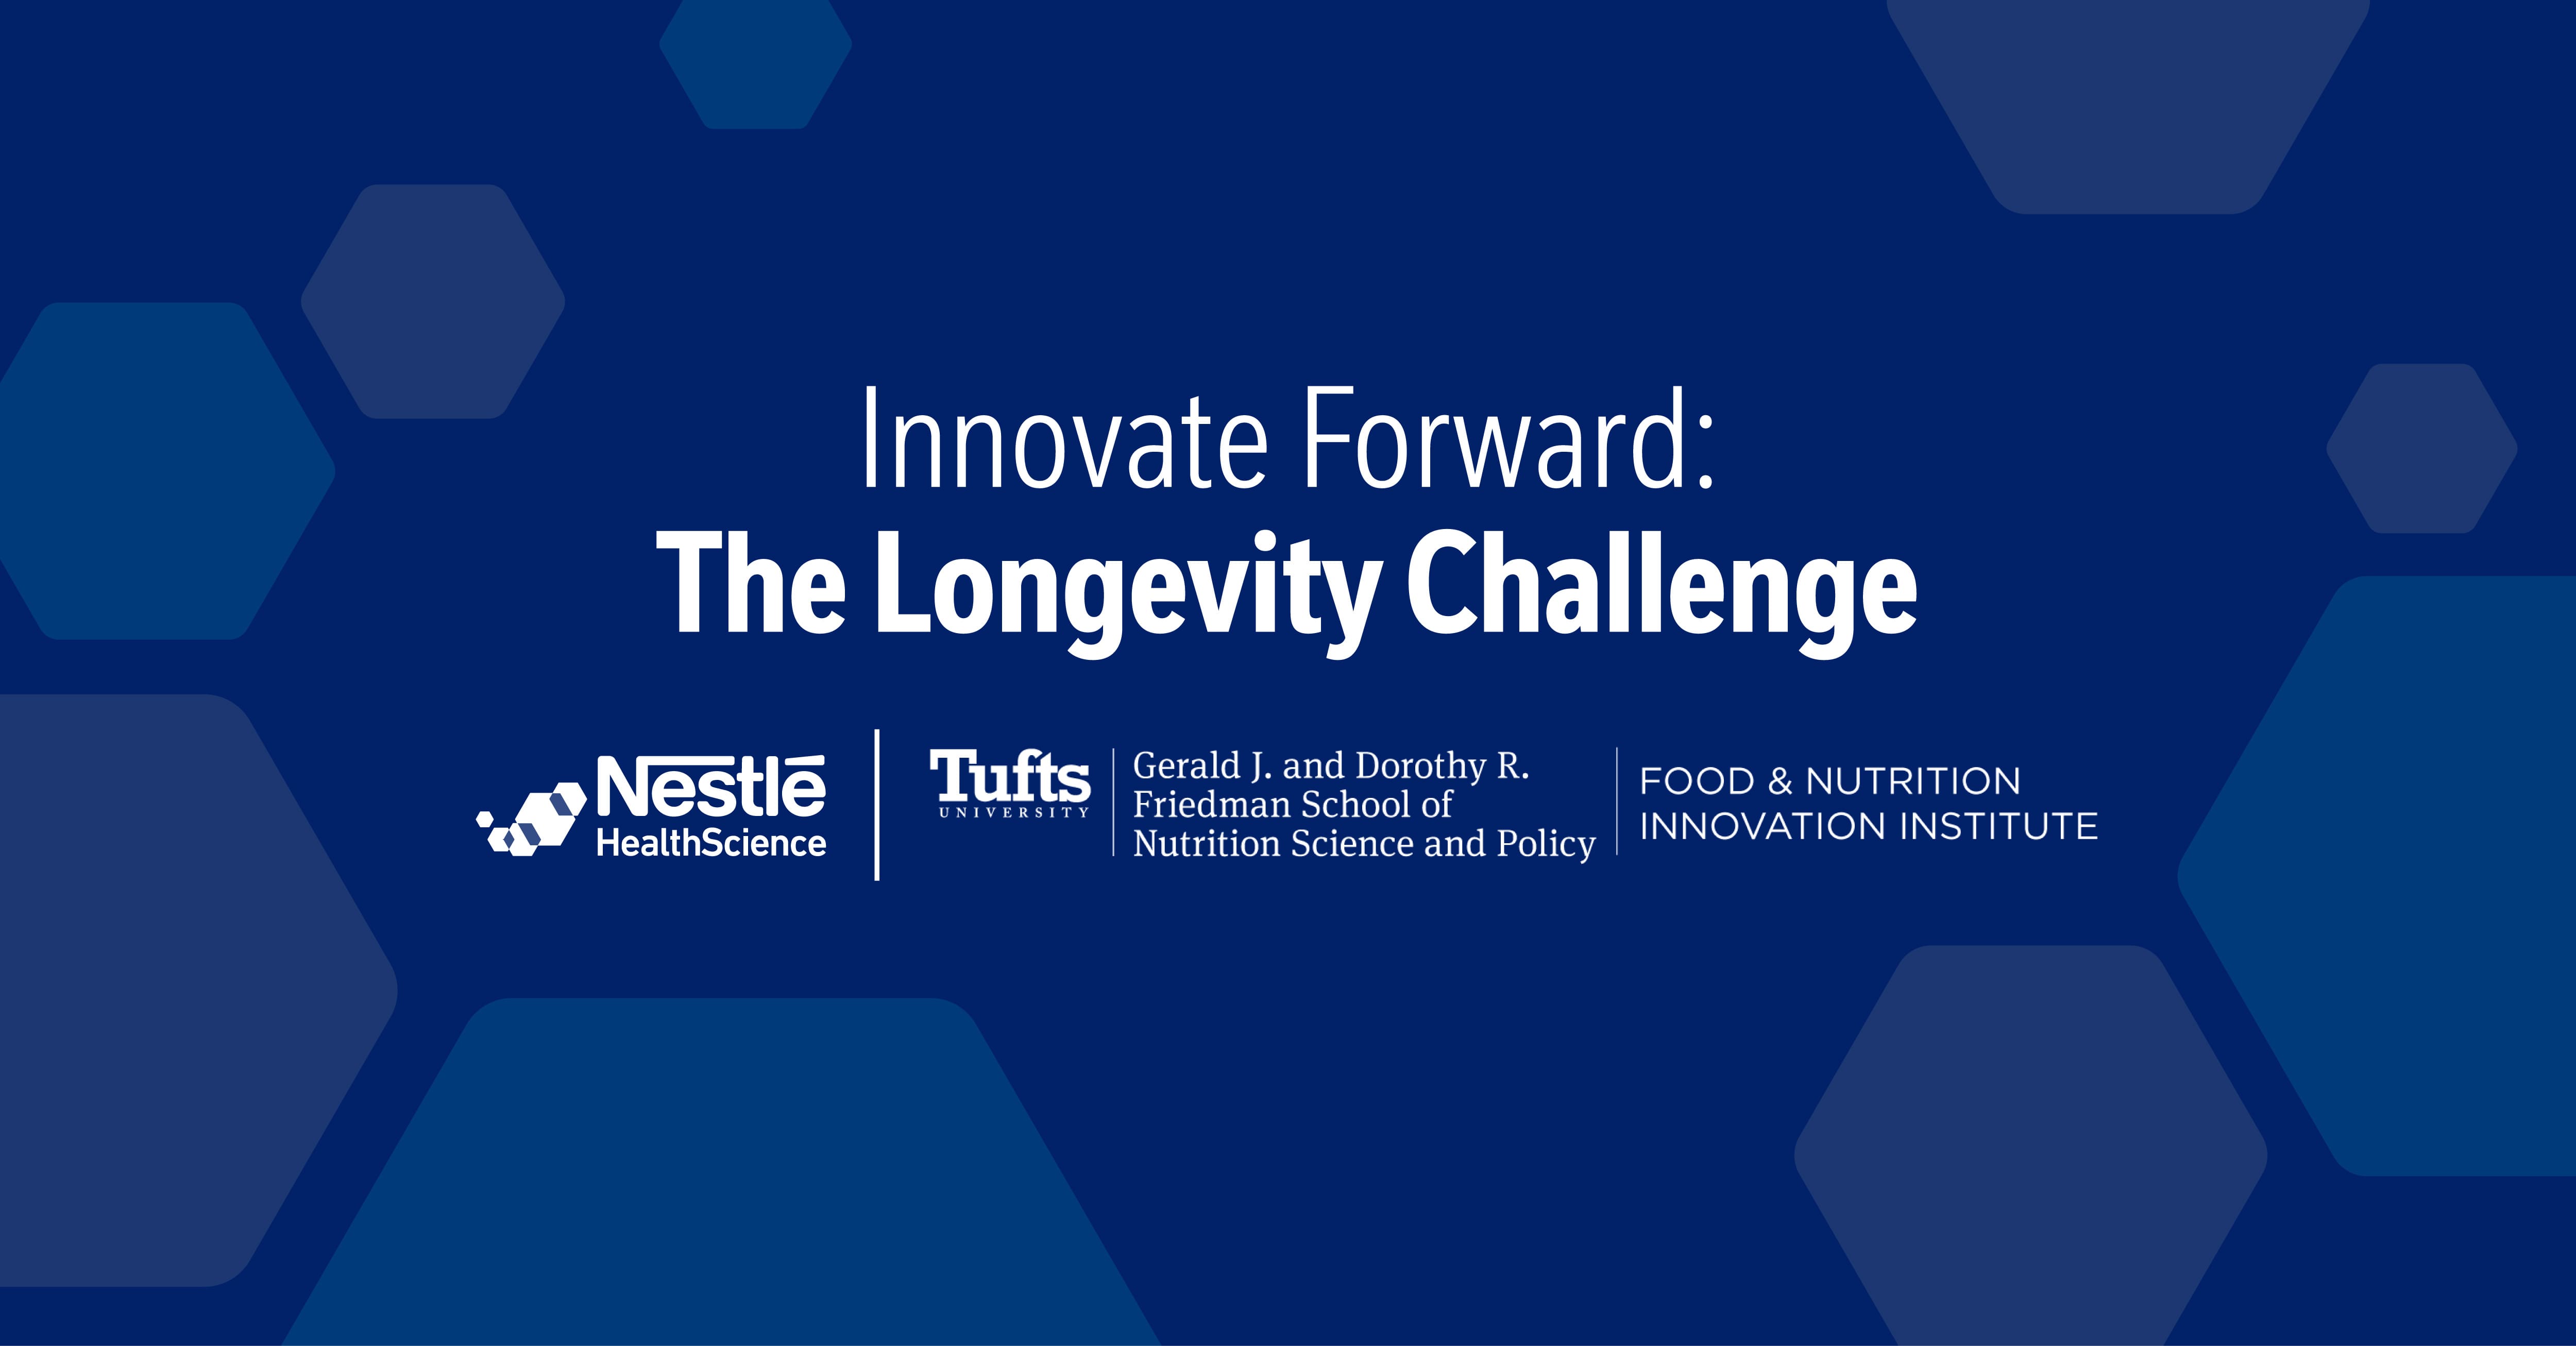 Nestlé Health Science and The Food & Nutrition Innovation Institute at the Friedman School at Tufts University Announce Startup Challenge Winners